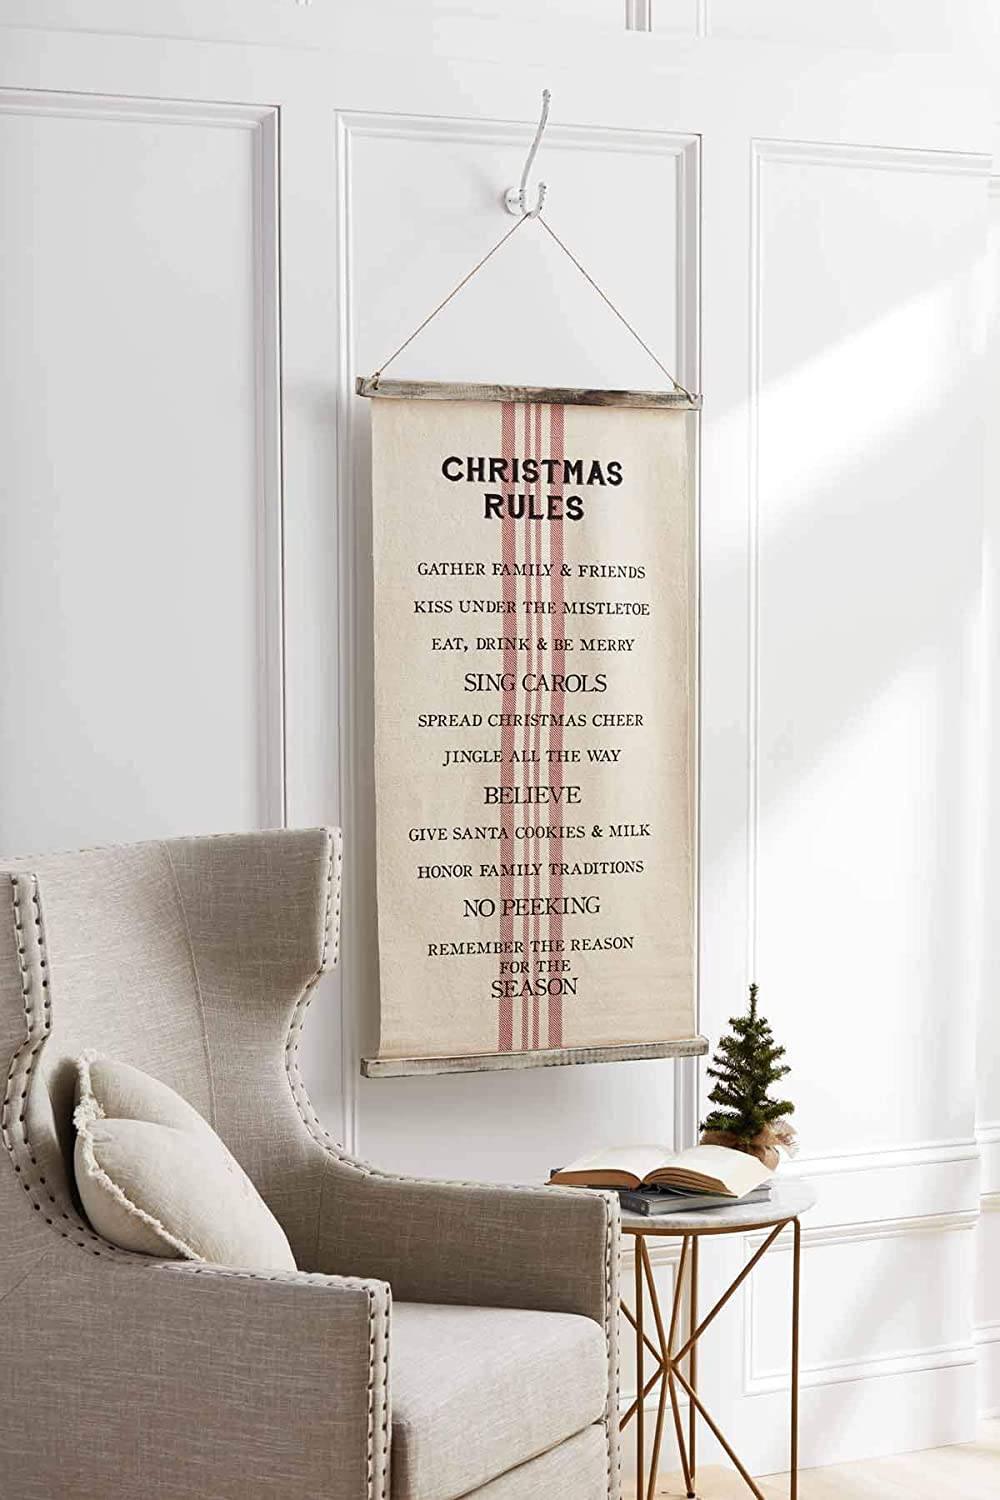 Holiday Rules Fabric Hanger - Village Floral Designs and Gifts